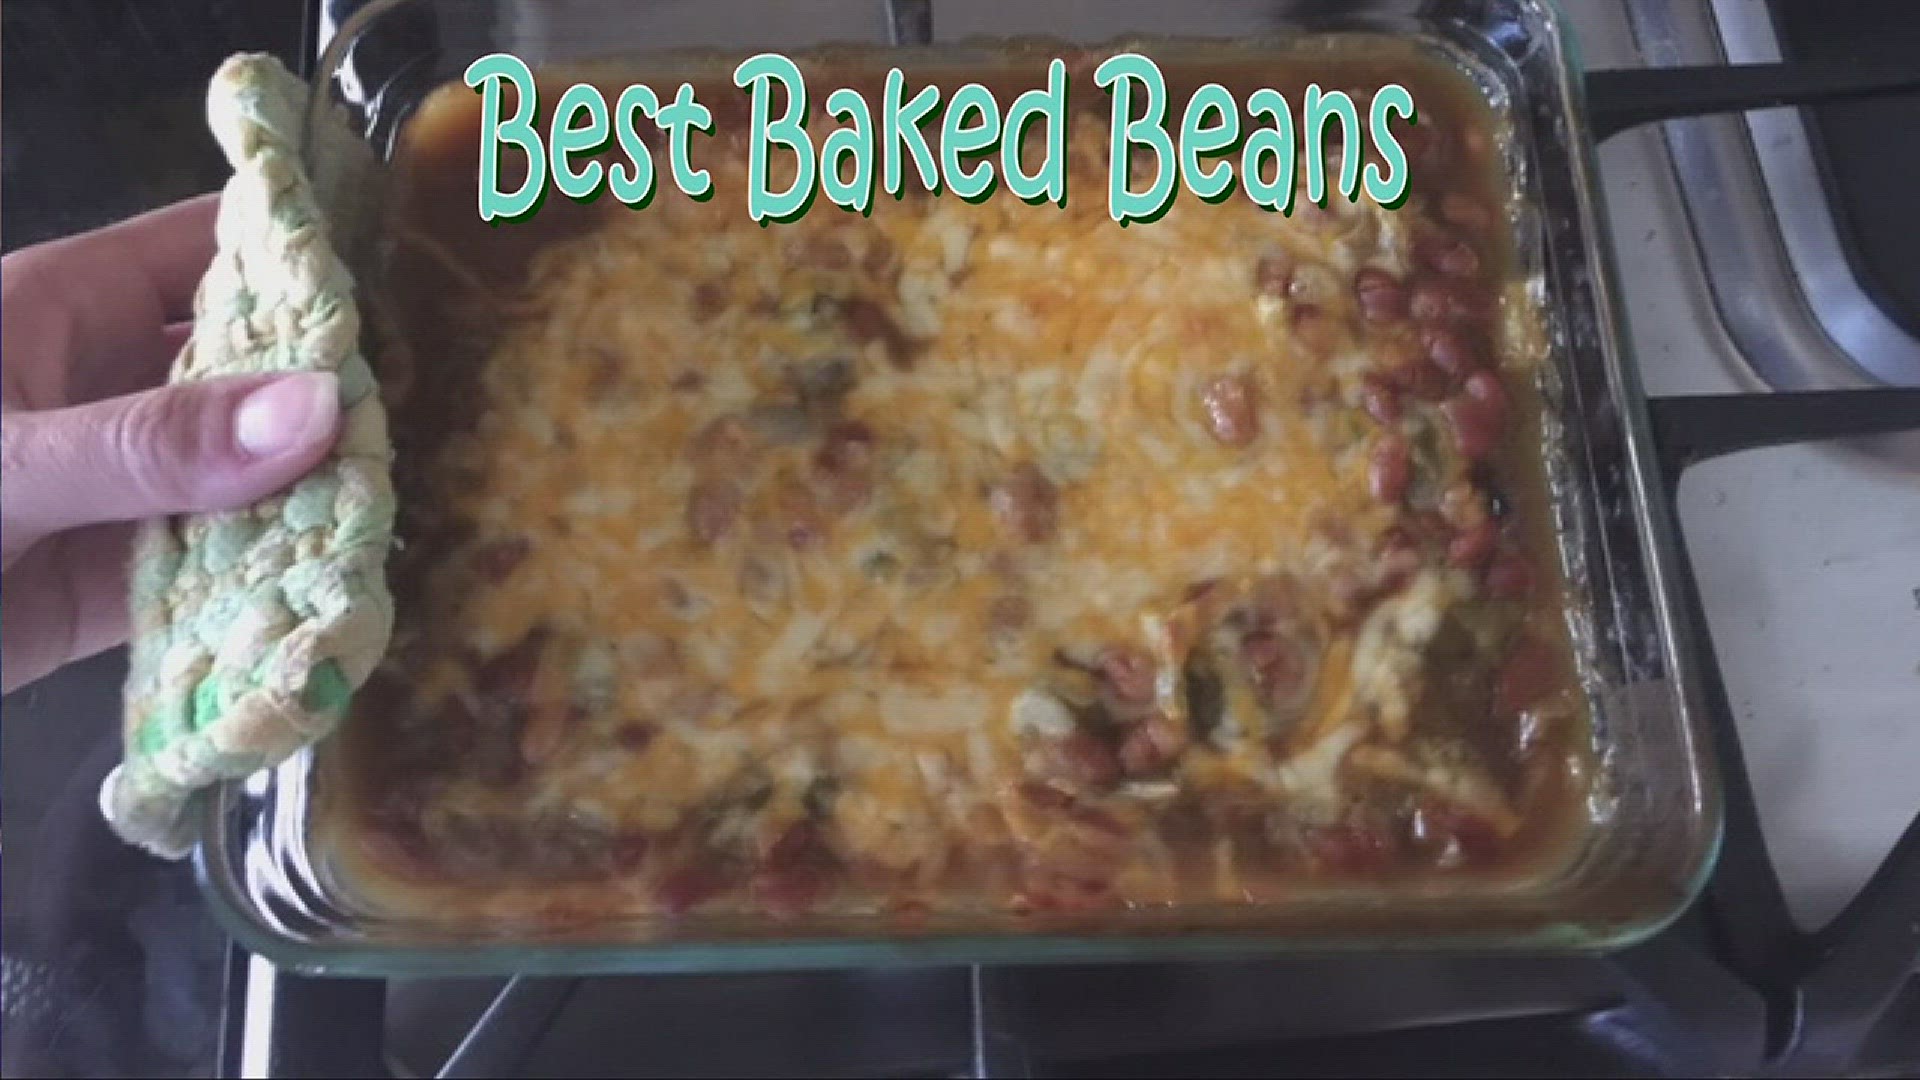 Hungry? Check out this easy recipe for baked beans from WKYC's morning meteorologist Hollie Strano in today's edition of 'Hollie's Food Forecast.'